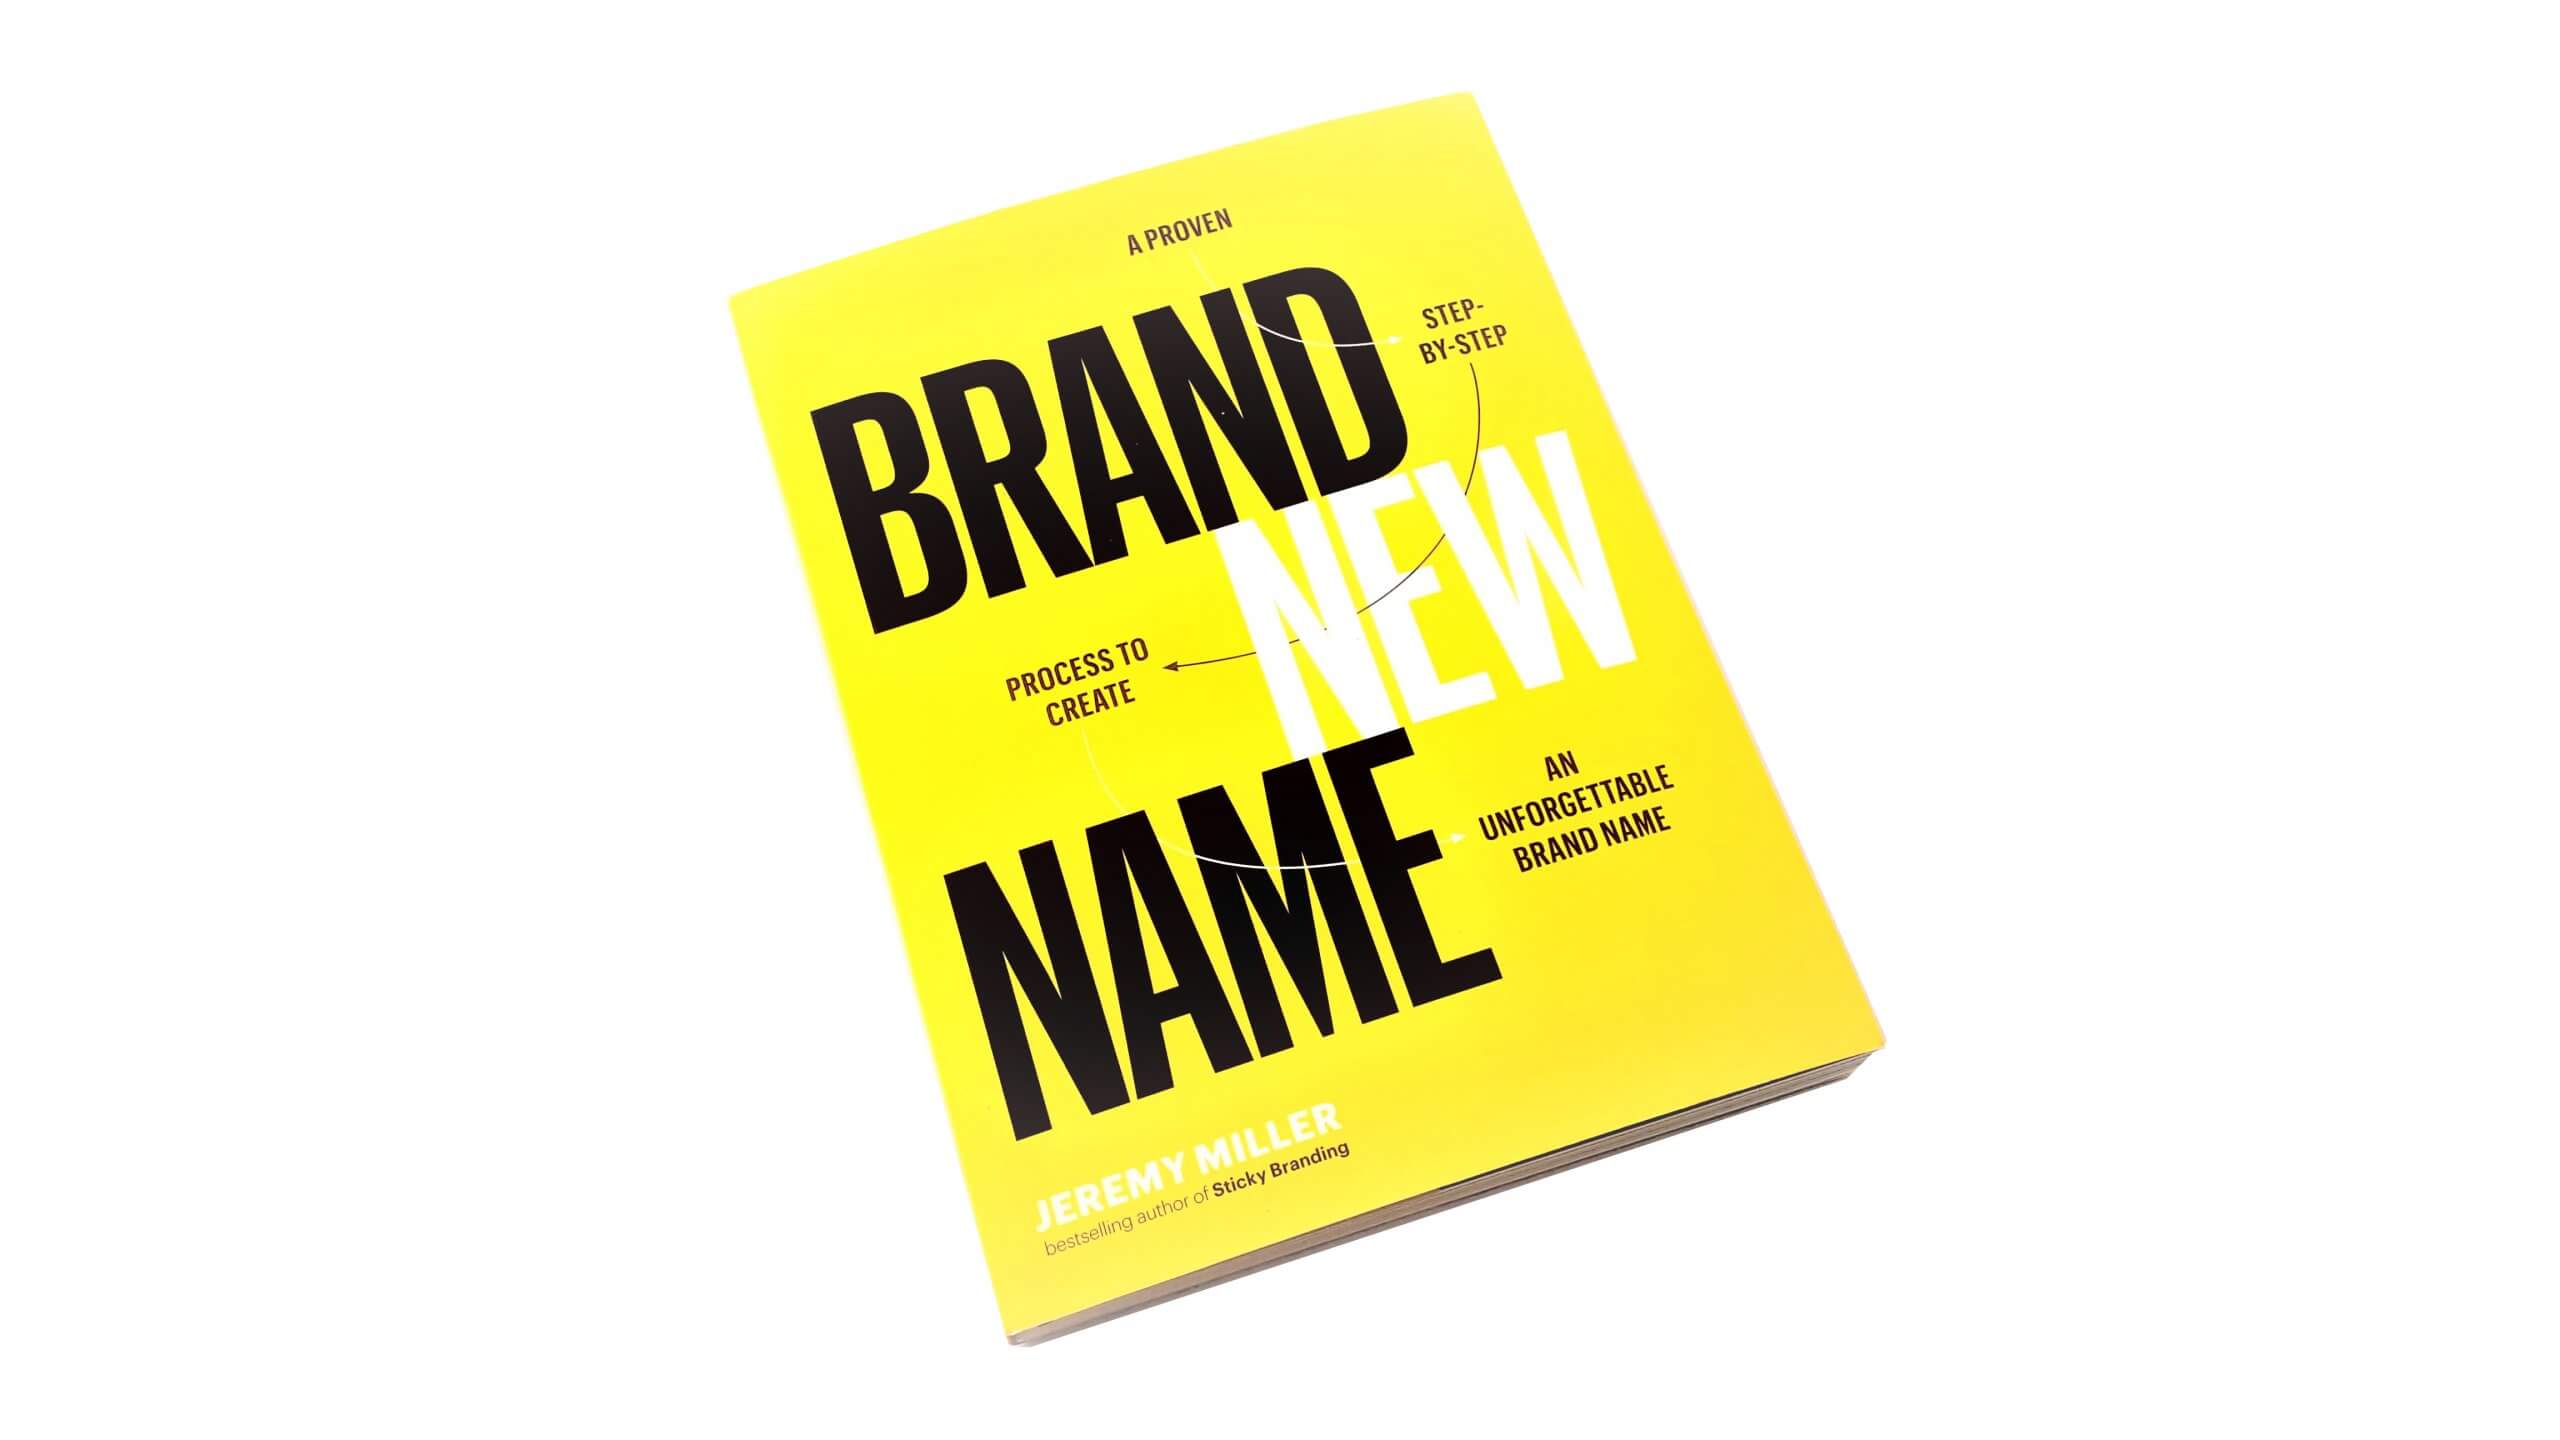 Brand New Name by Jeremy Miller_ Best Books For Graphic Designers 